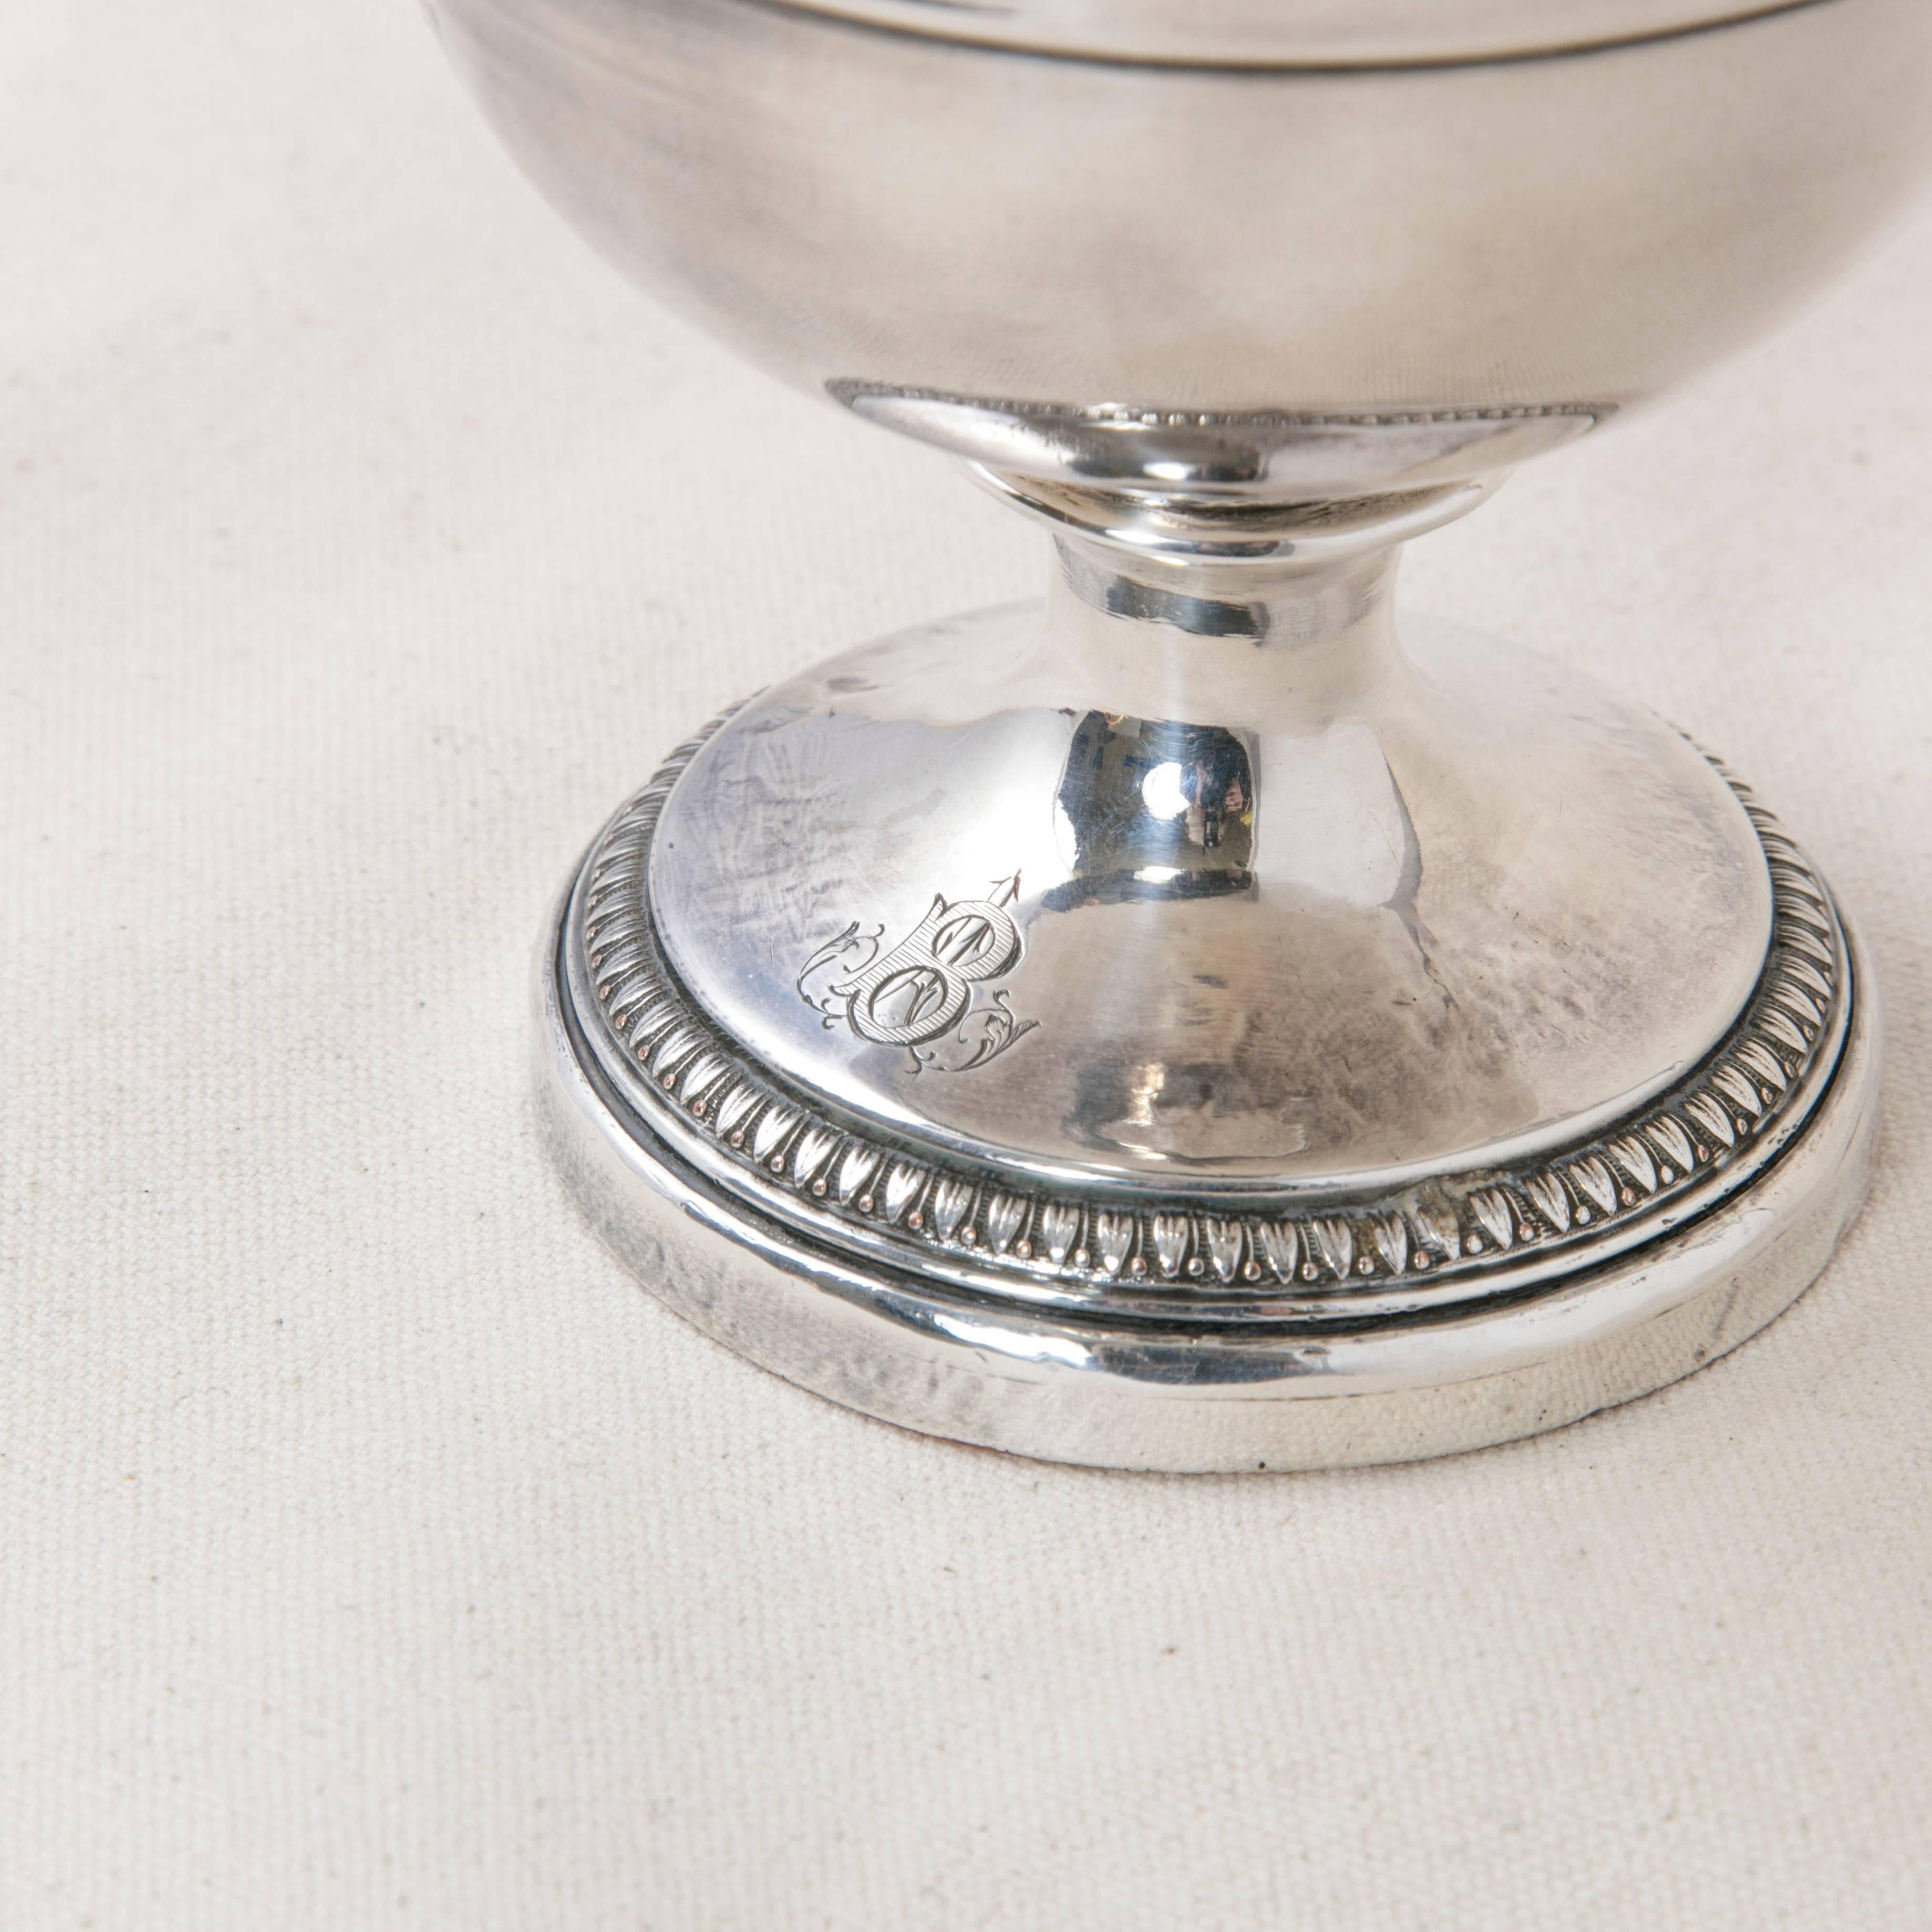 19th Century, English Silver Plate Serving Piece or Urn with Crystal Insert 2